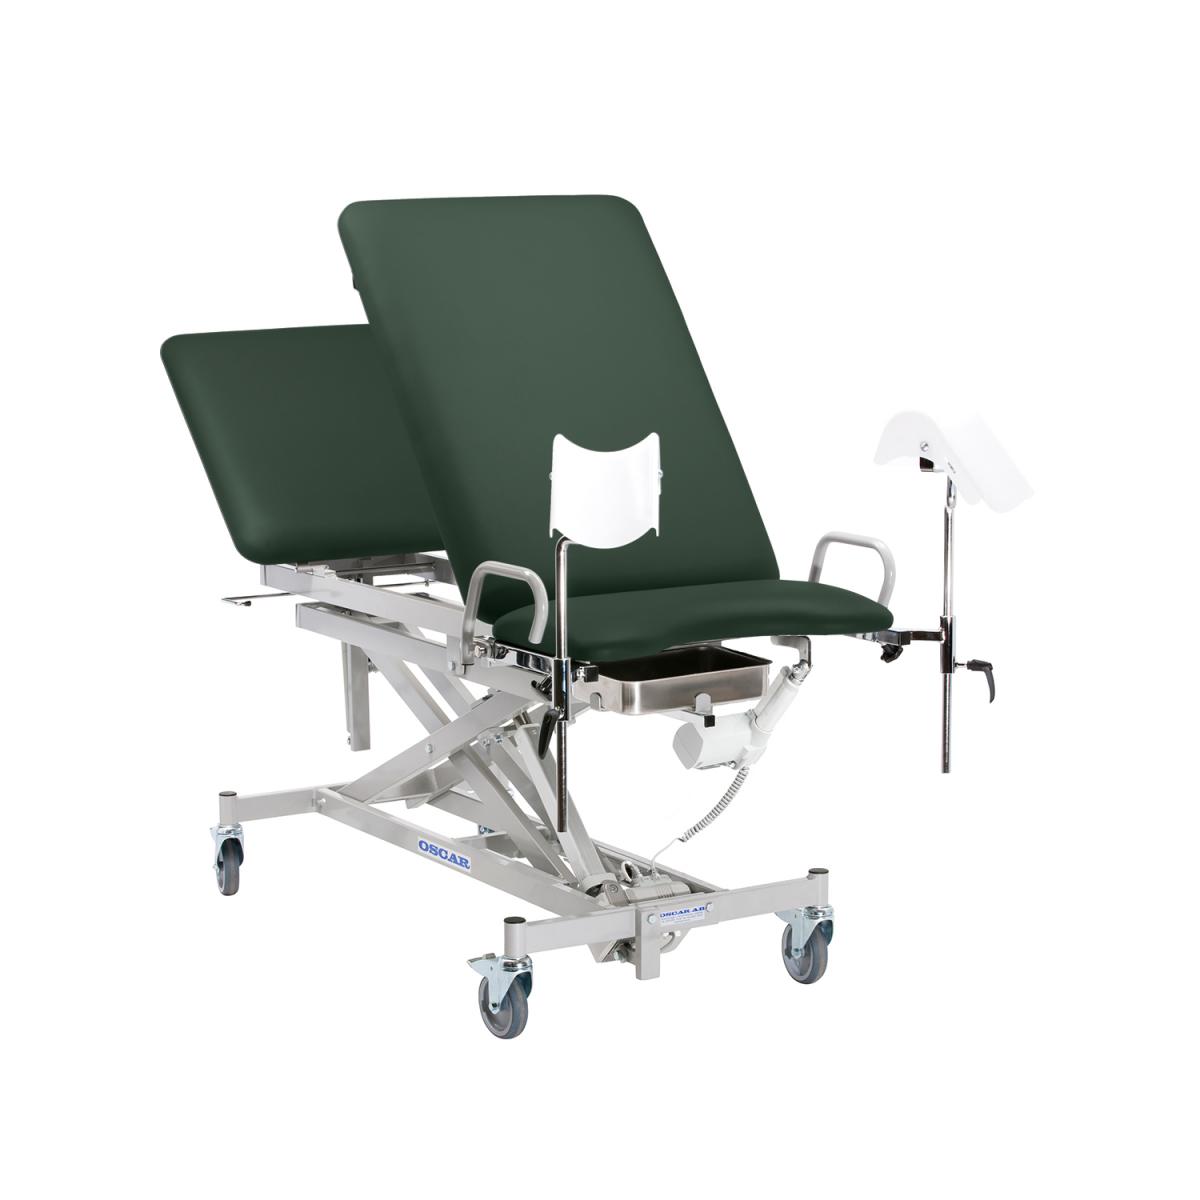 Examination table Special, Gynaecological combi